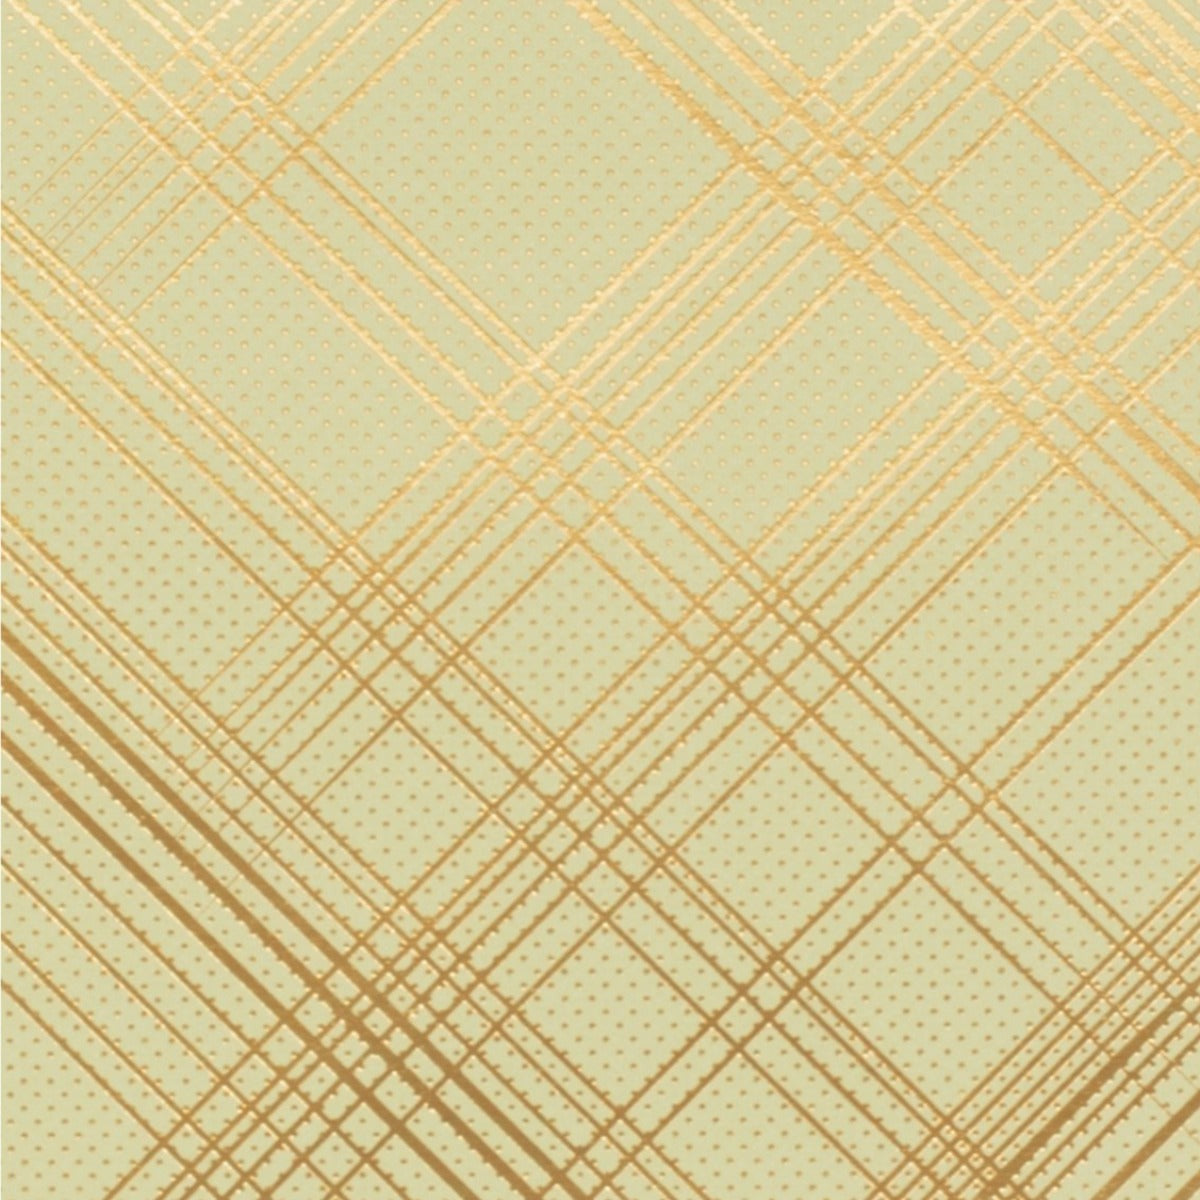 GOLD FOIL LINES on mint-colored 12x12 cardstock - American Crafts specialty paper